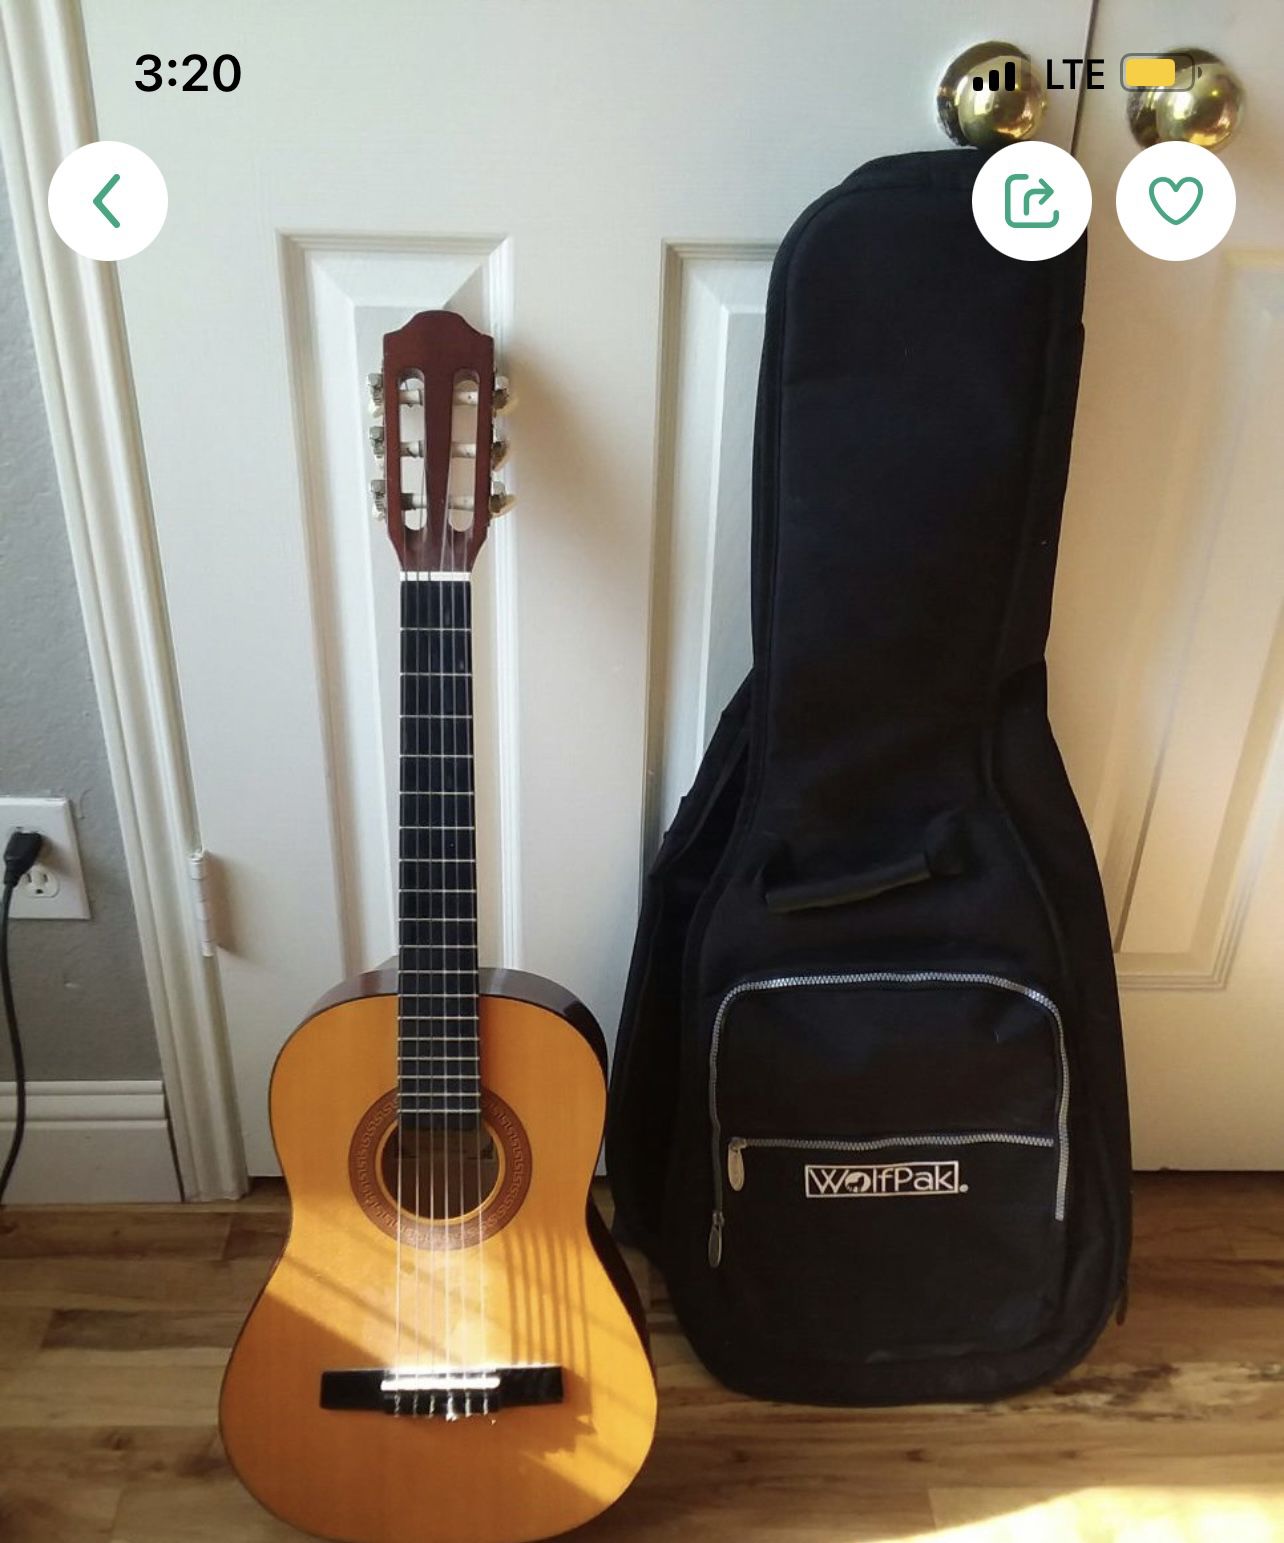 Hohner HC02 1/2 sized Classical Guitar w/bag $40 or Best Offer 